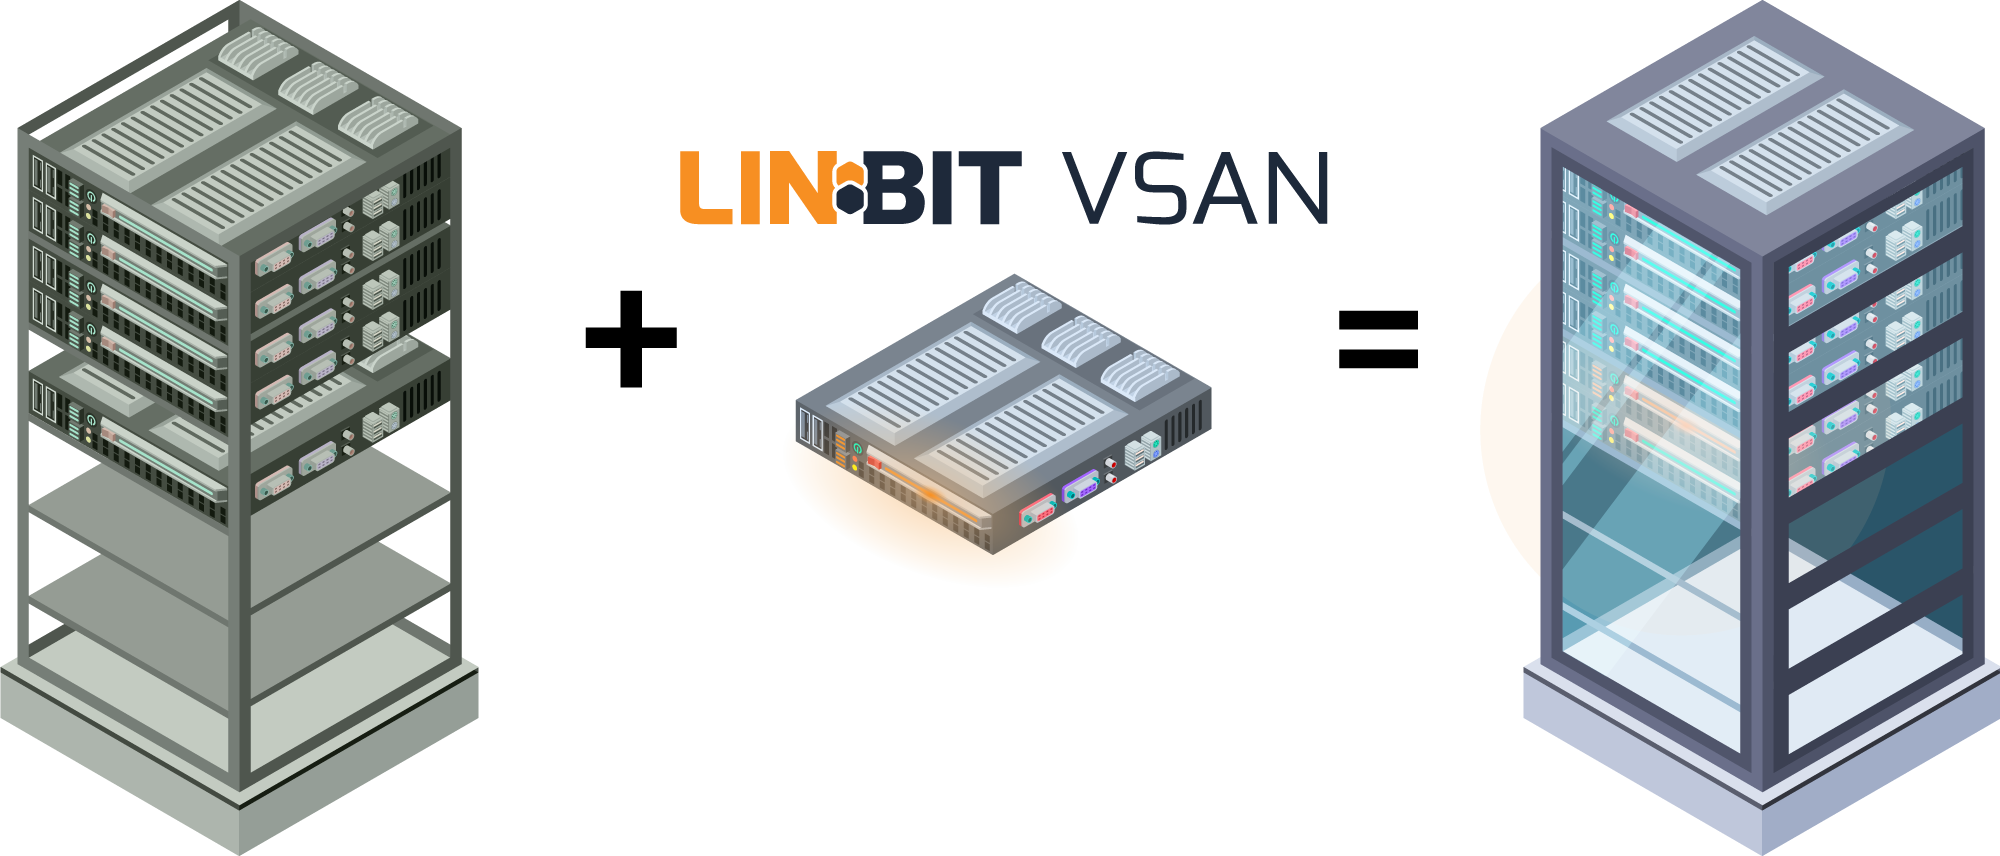 LINBIT VSAN and two servers